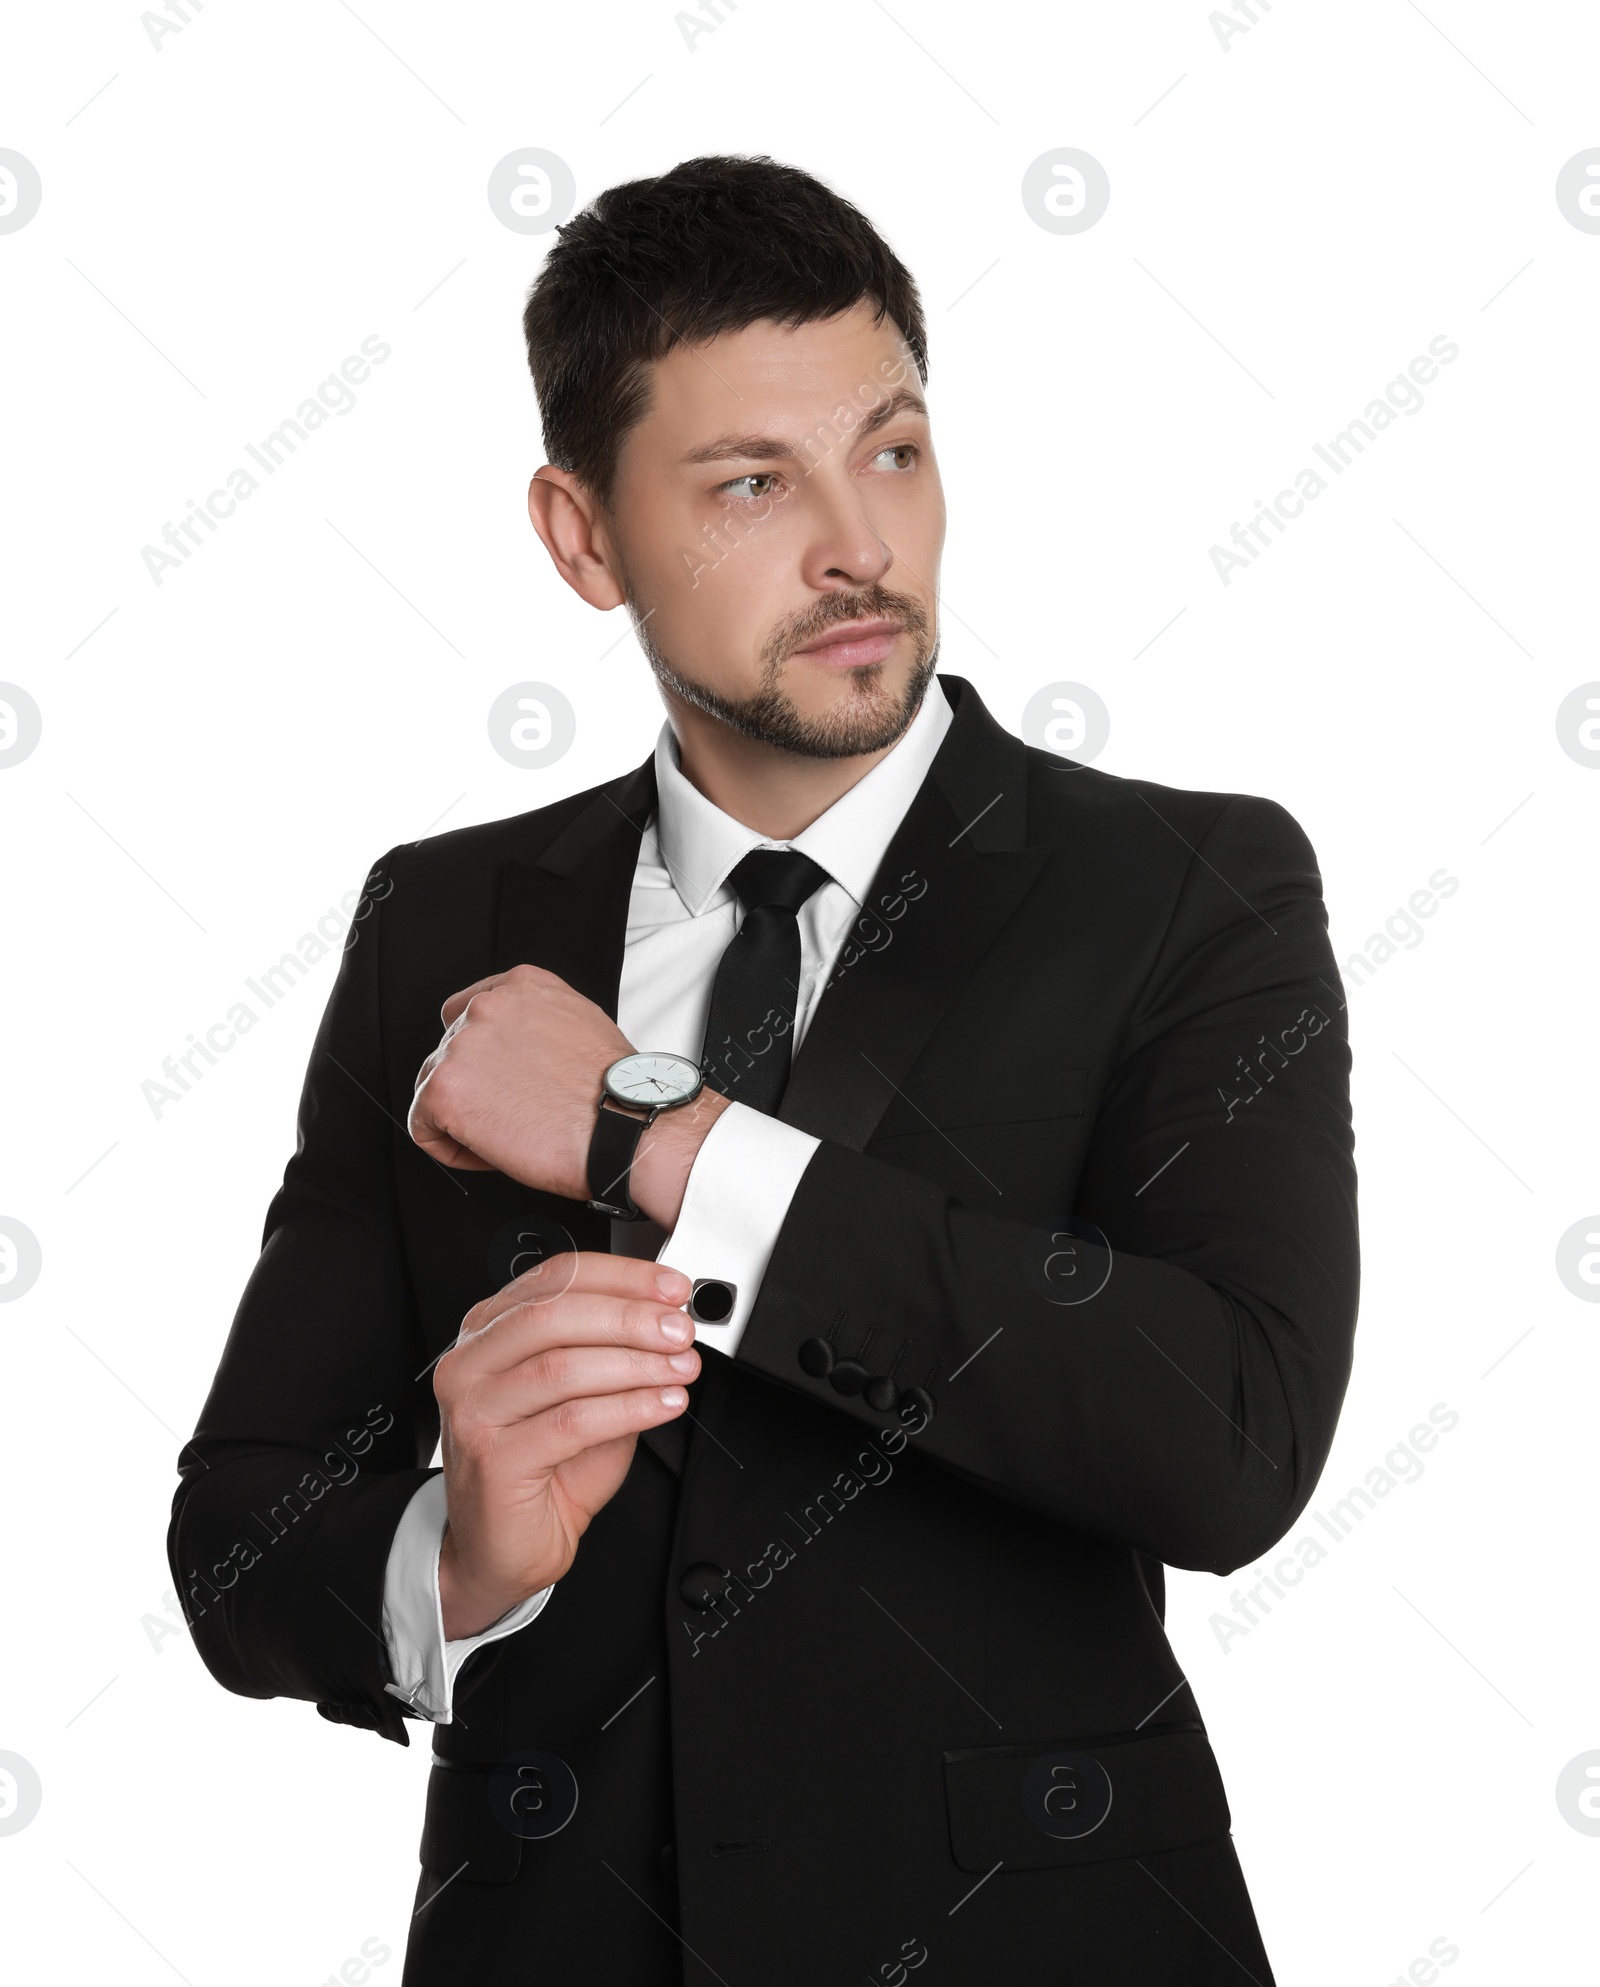 Photo of Man wearing stylish suit and cufflinks on white background